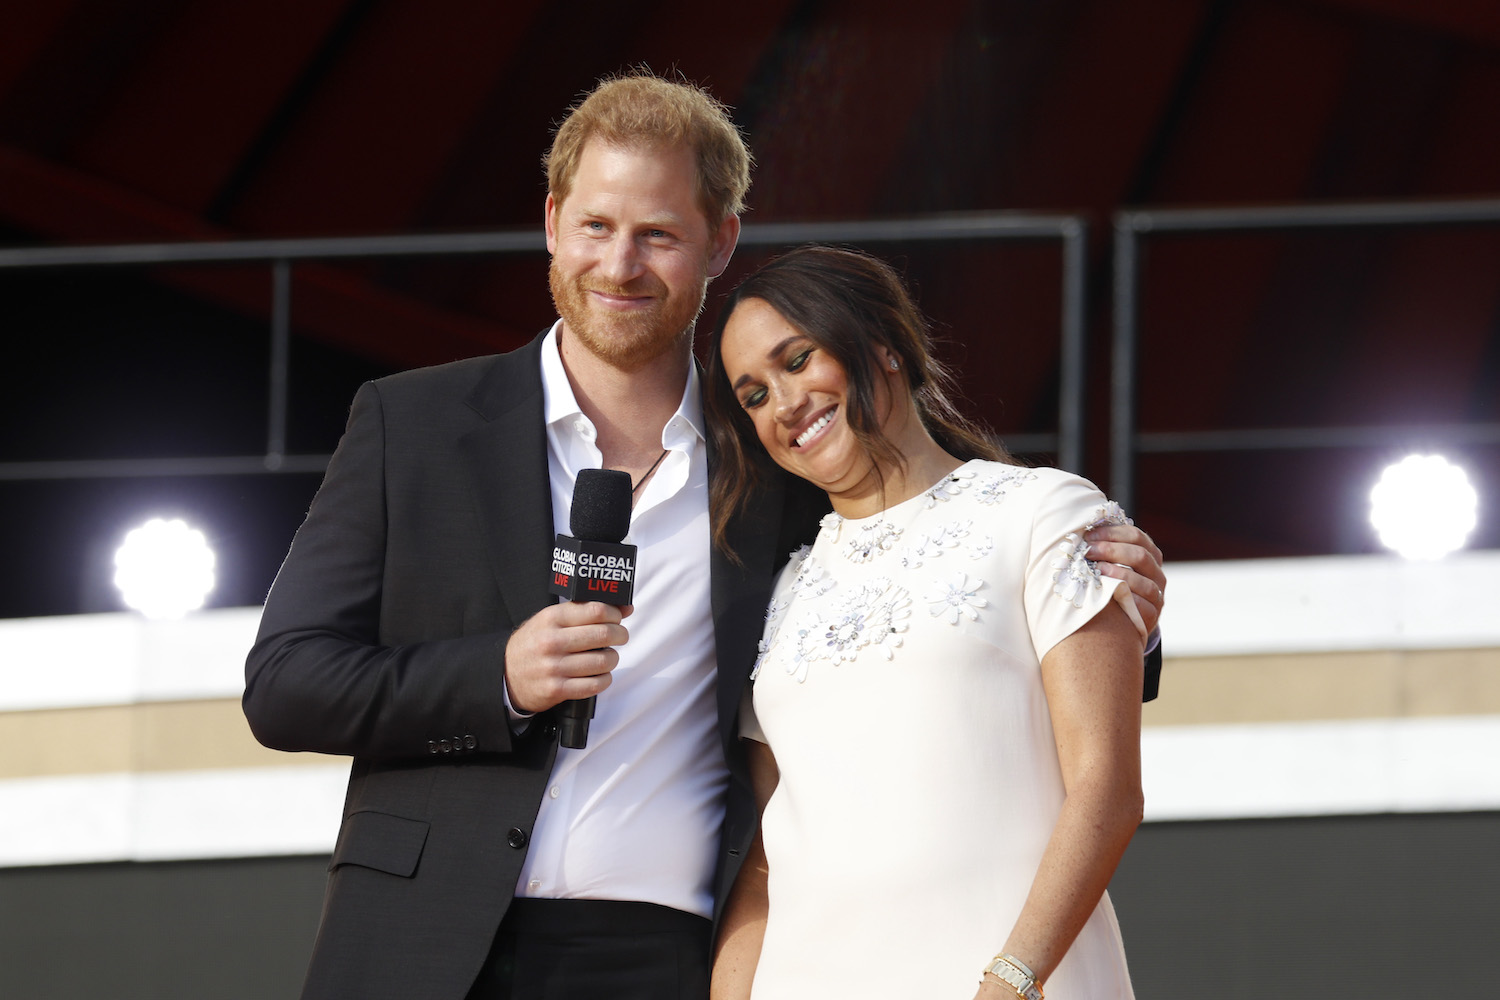 Prince Harry smiles with his arm around Meghan Markle onstage at Global Citizen Live